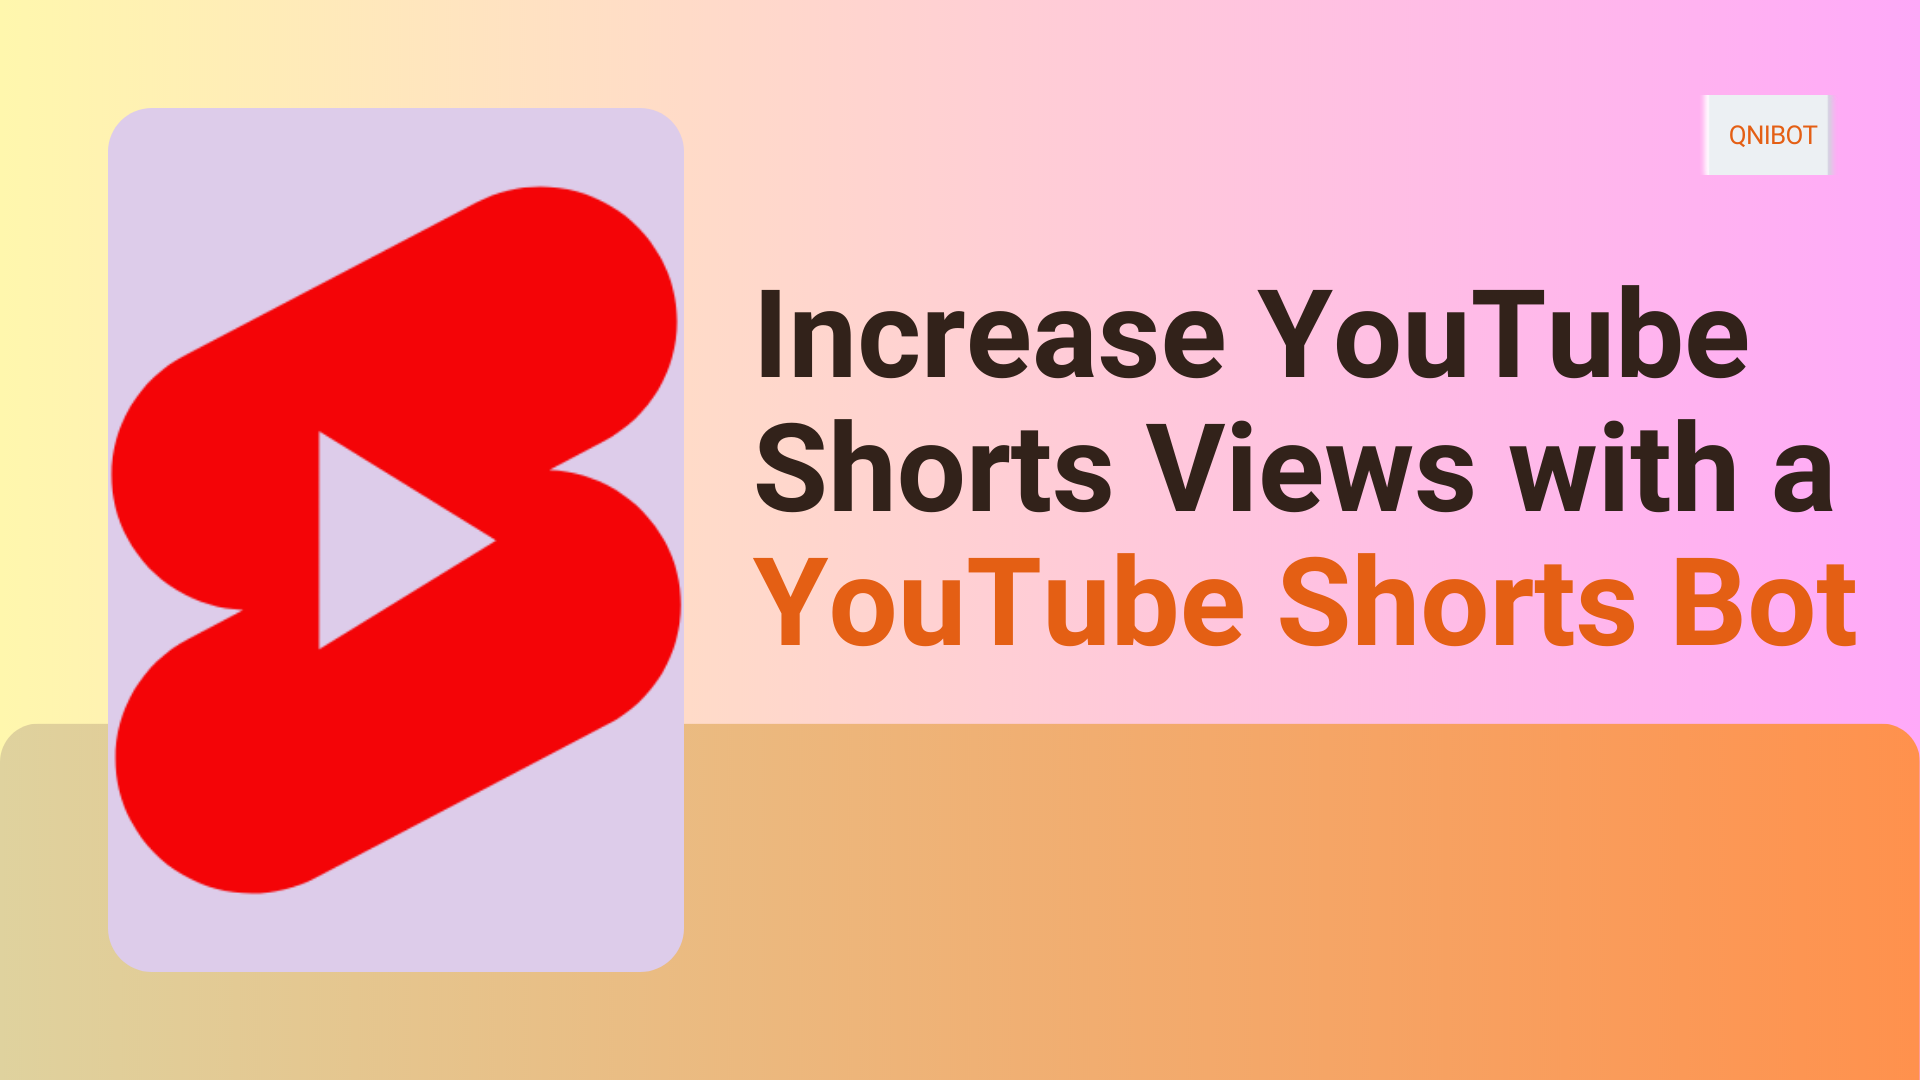 Save Time and Maximize Views: Increase YouTube Shorts Views with a YouTube Shorts Bot